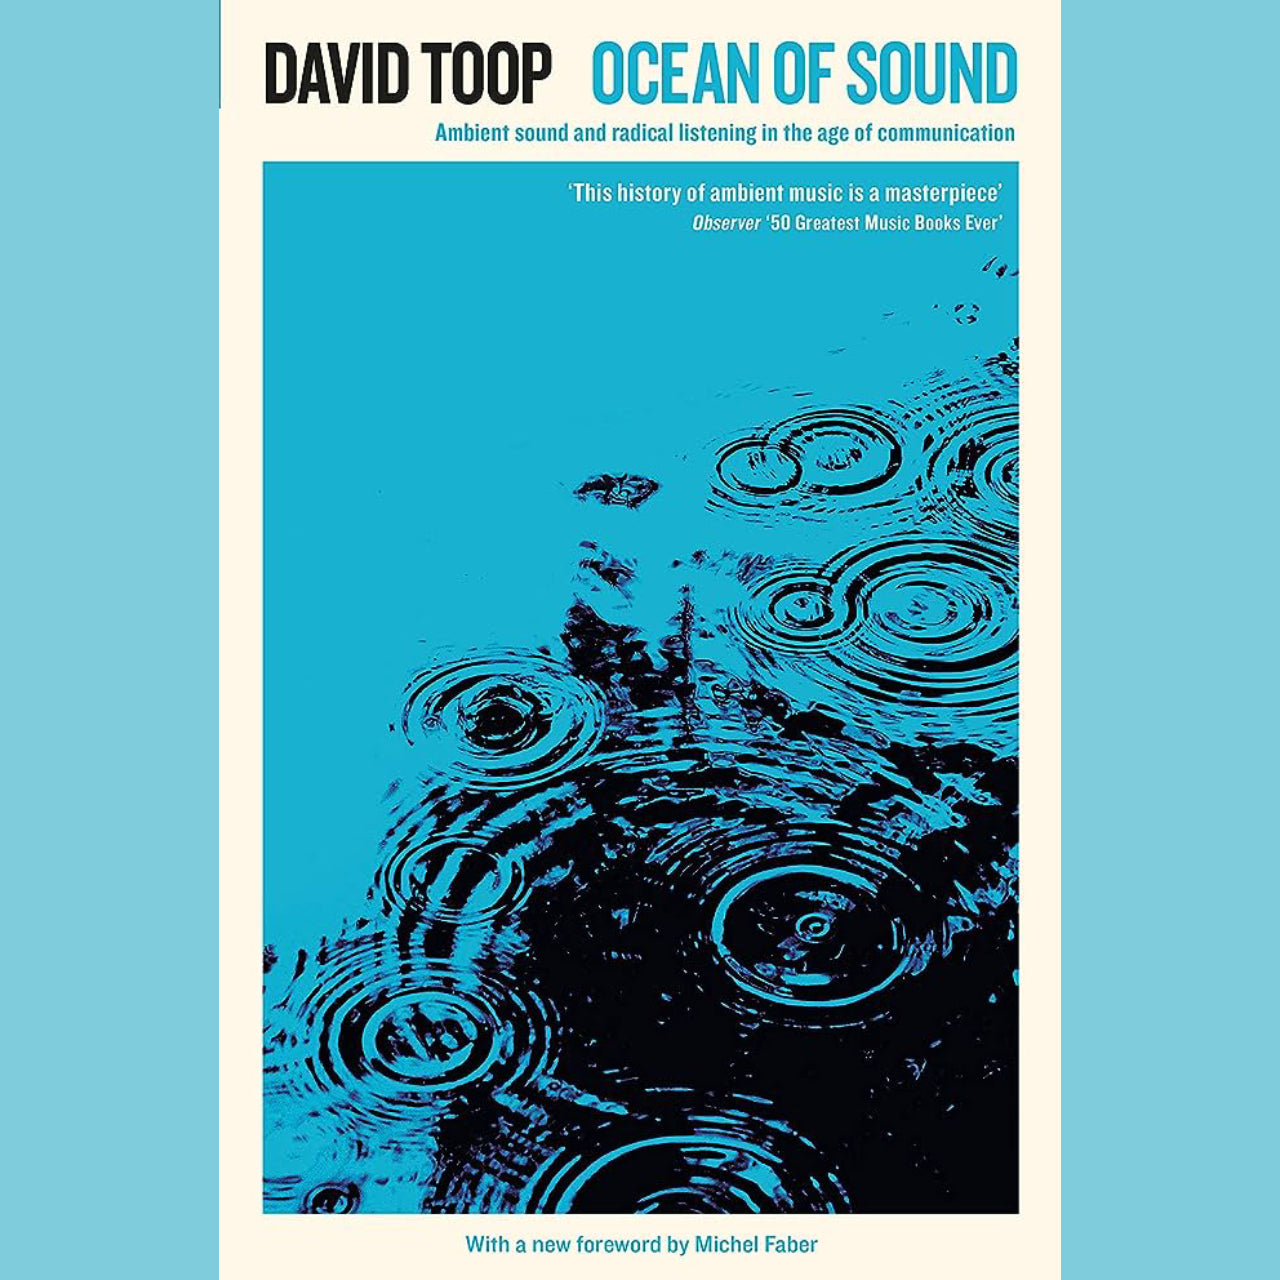 David Toop - Ocean of Sound | Buy the book from Flying Nun Records